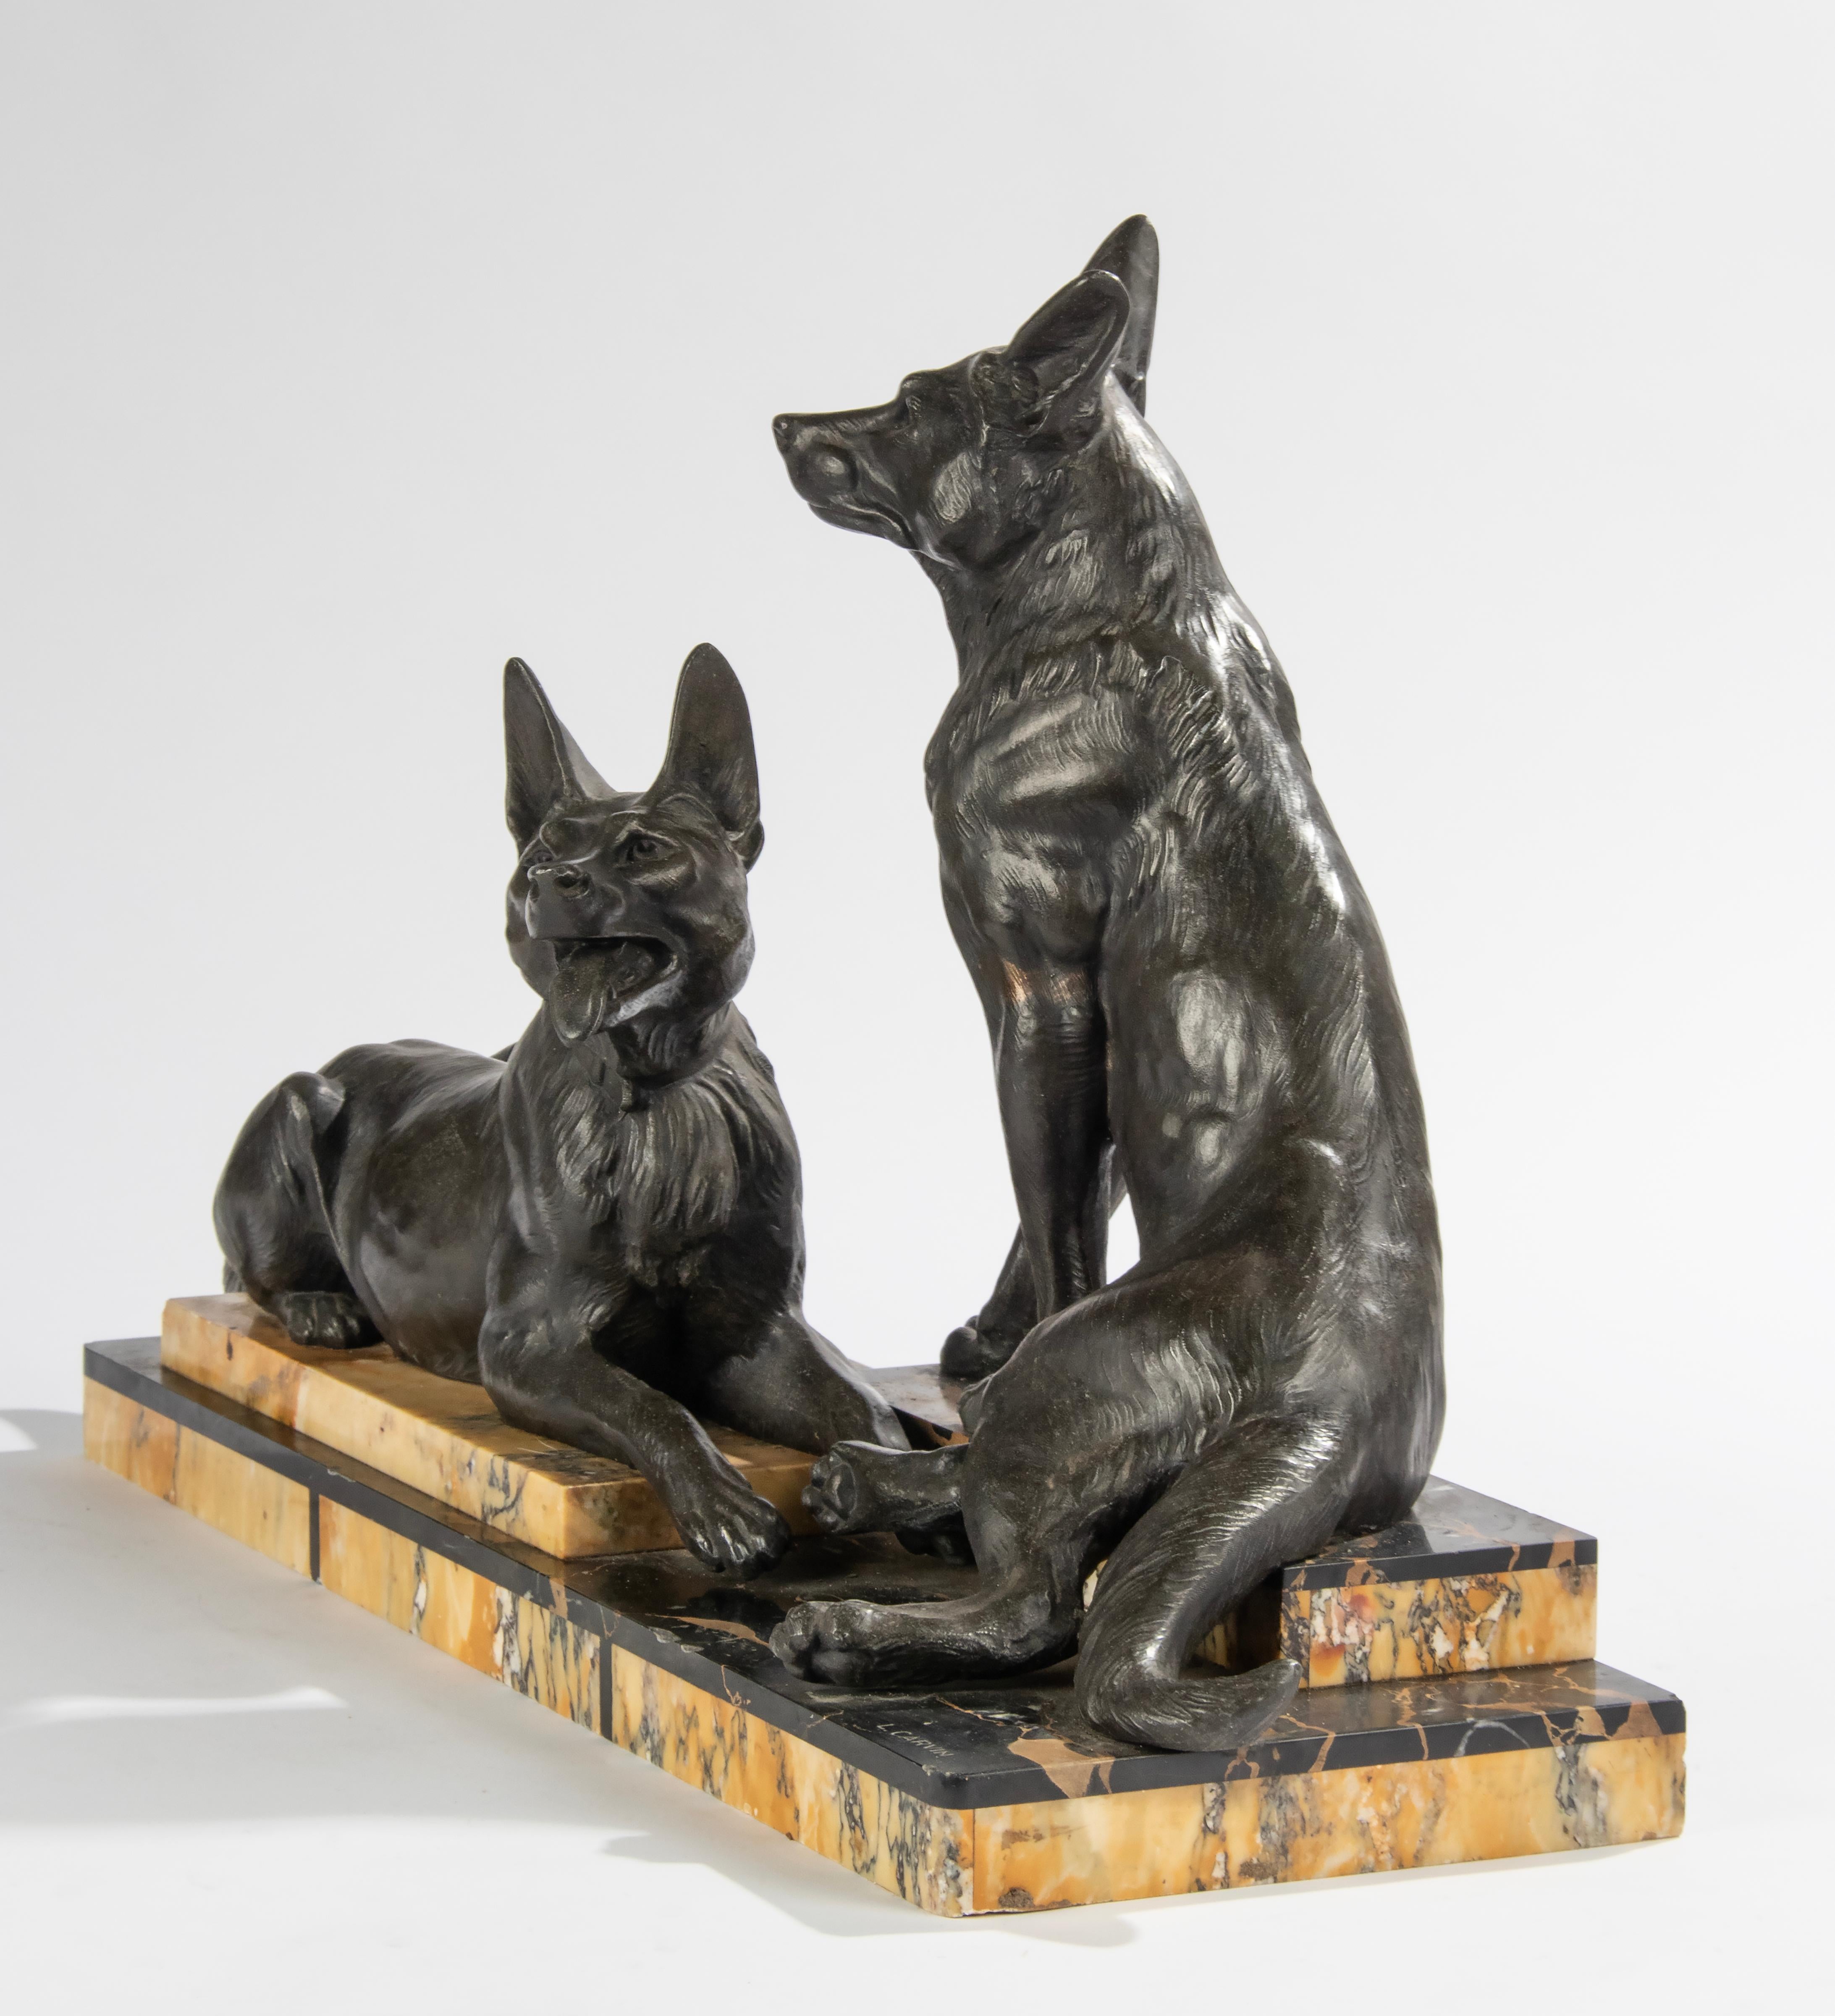 Art Deco Period Sculpture of German or Belgian Sheppards by Louis Carvin For Sale 1